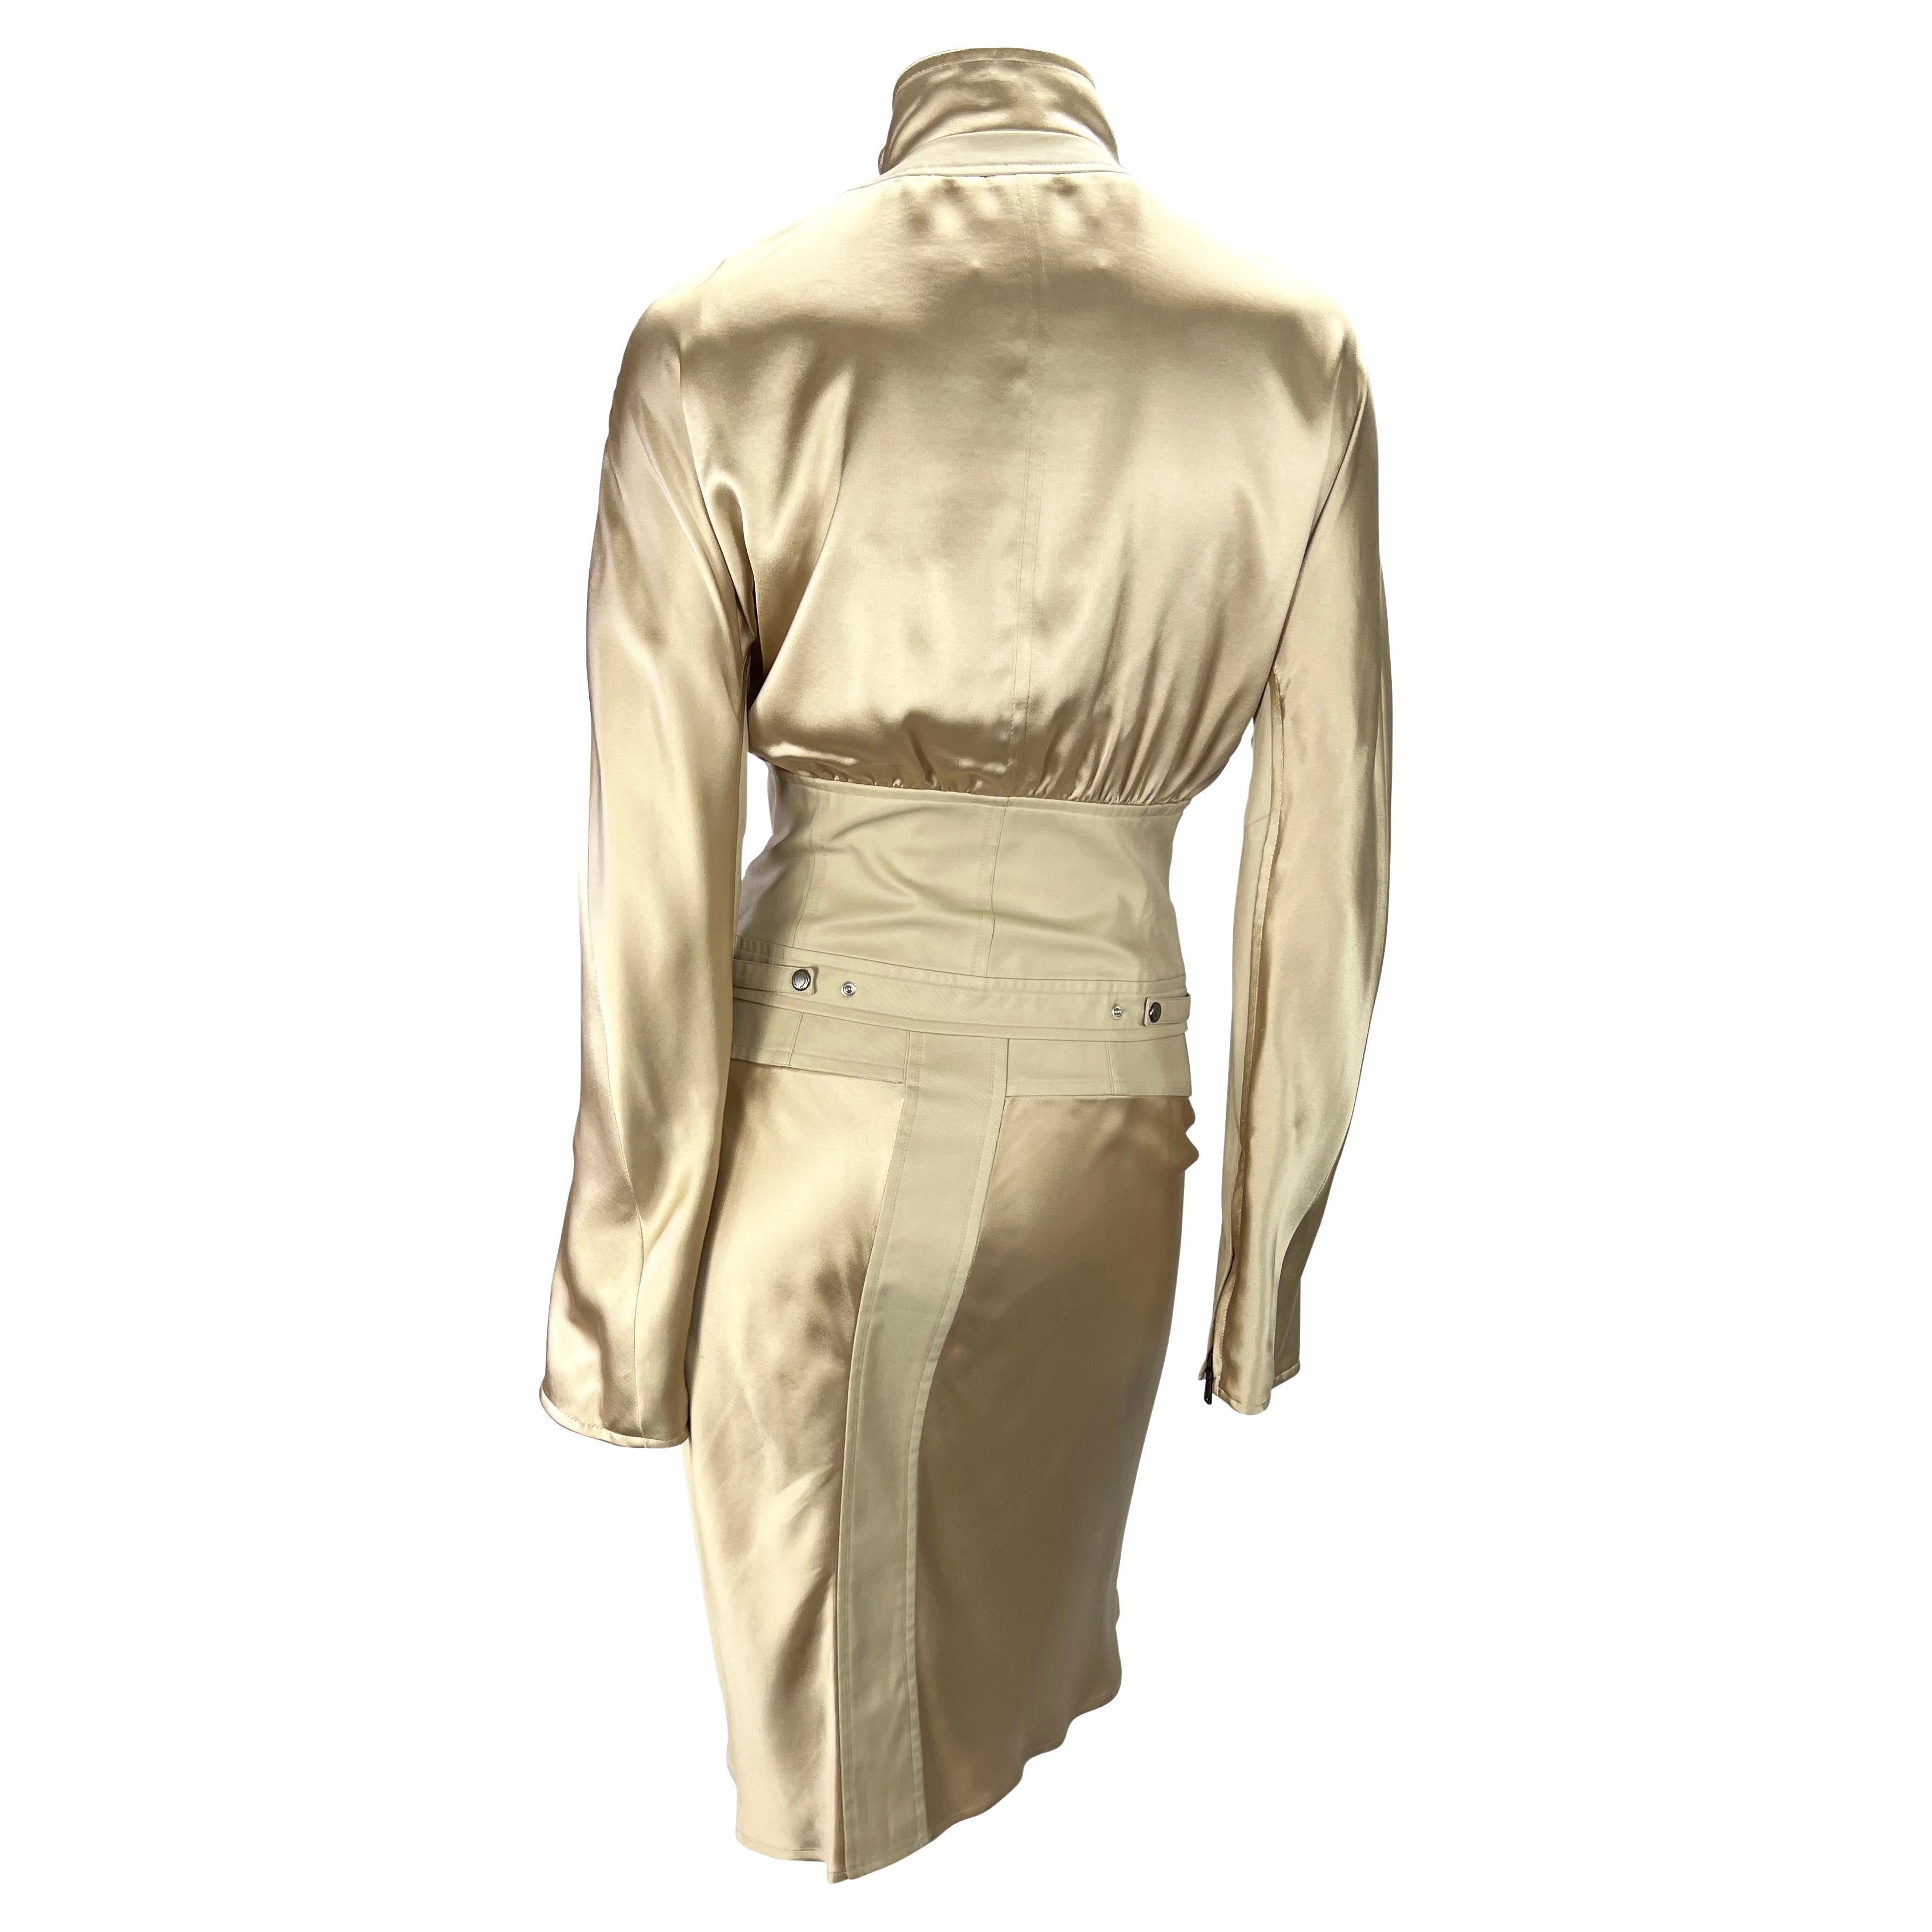 2003 Yves Saint Laurent by Tom Ford Champagne Silk Satin Skirt Jacket Set In Good Condition For Sale In West Hollywood, CA